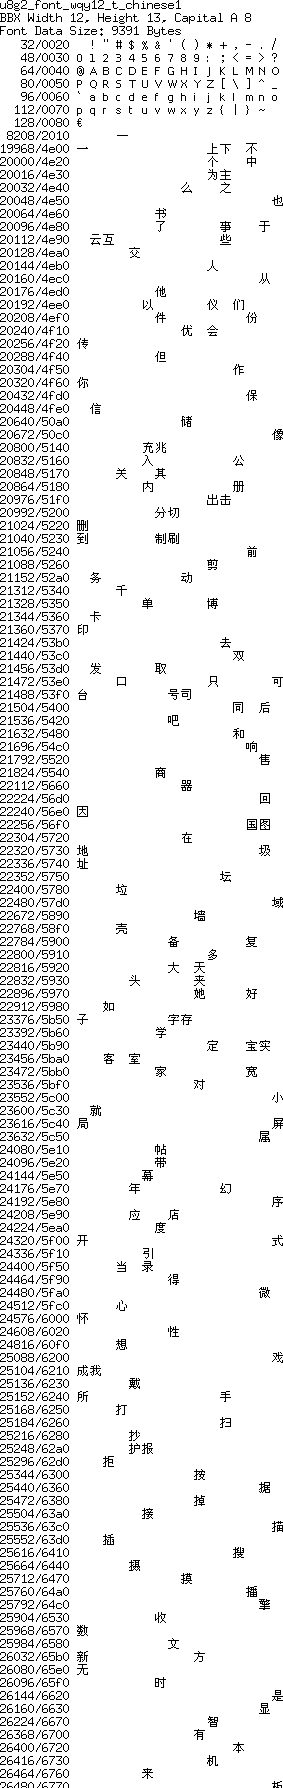 fntpic/u8g2_font_wqy12_t_chinese1.png